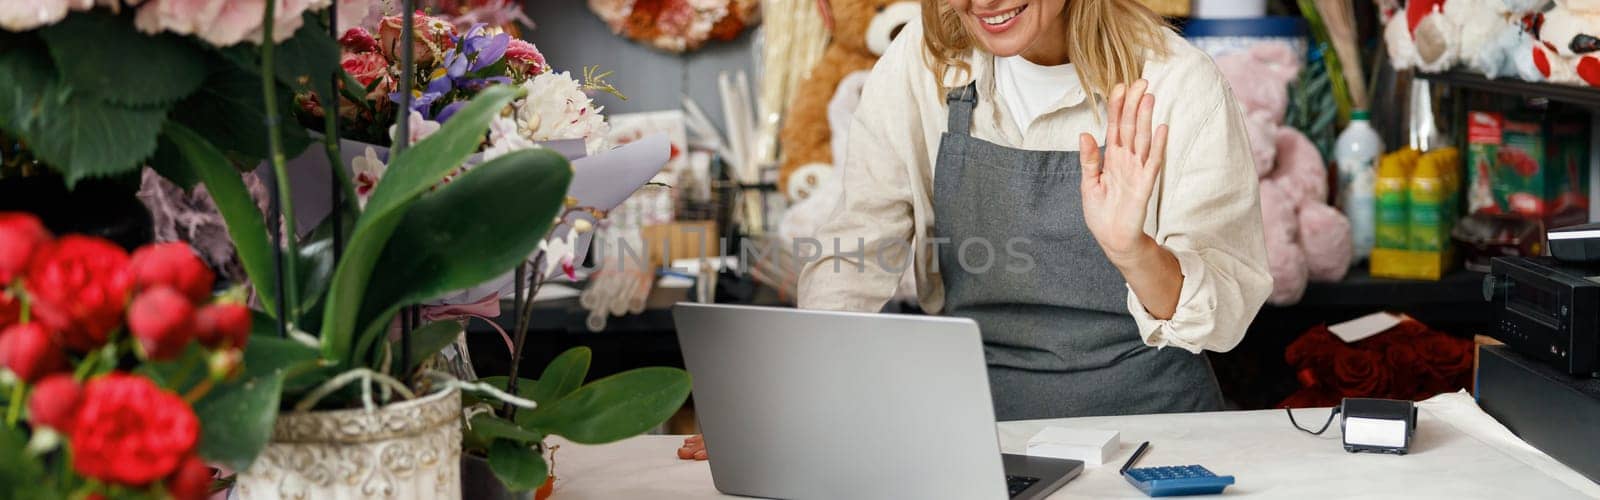 Woman florist talking via video call with friends during working day in floral shop by Yaroslav_astakhov